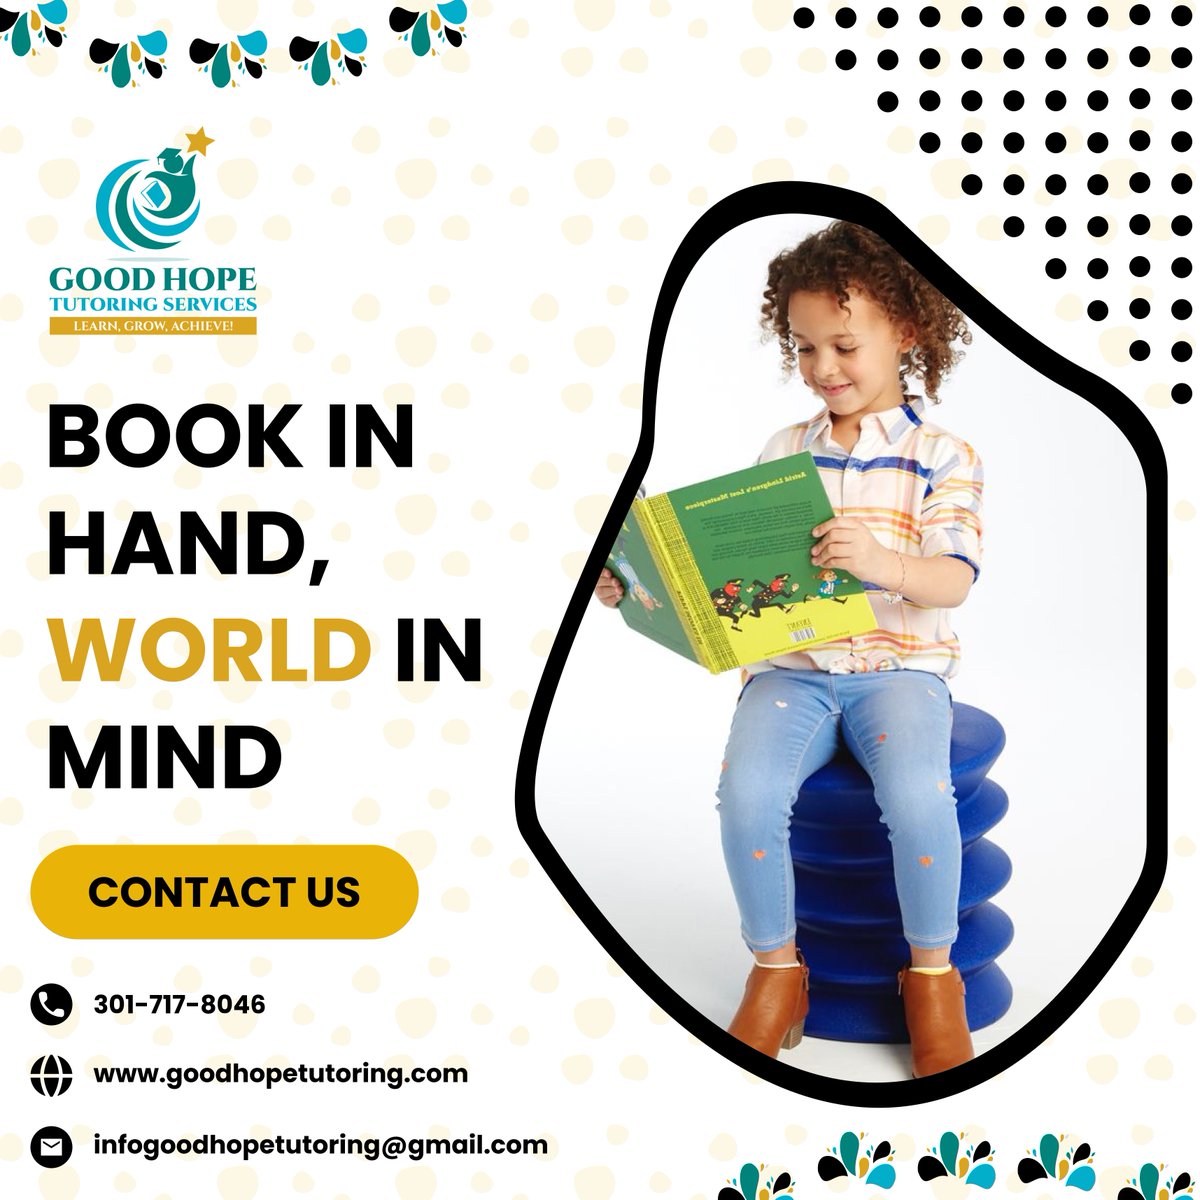 📚🌍 With a book in hand and the world in mind, anything is possible! 🚀💡 We're here to help you expand your horizons through education.

#ReadingSkills #WritingWorkshop #LanguageLearning
#StudyGroup #LearningCommunity #StudyMotivation
#StudentLife #BrainBoost #StudyHacks